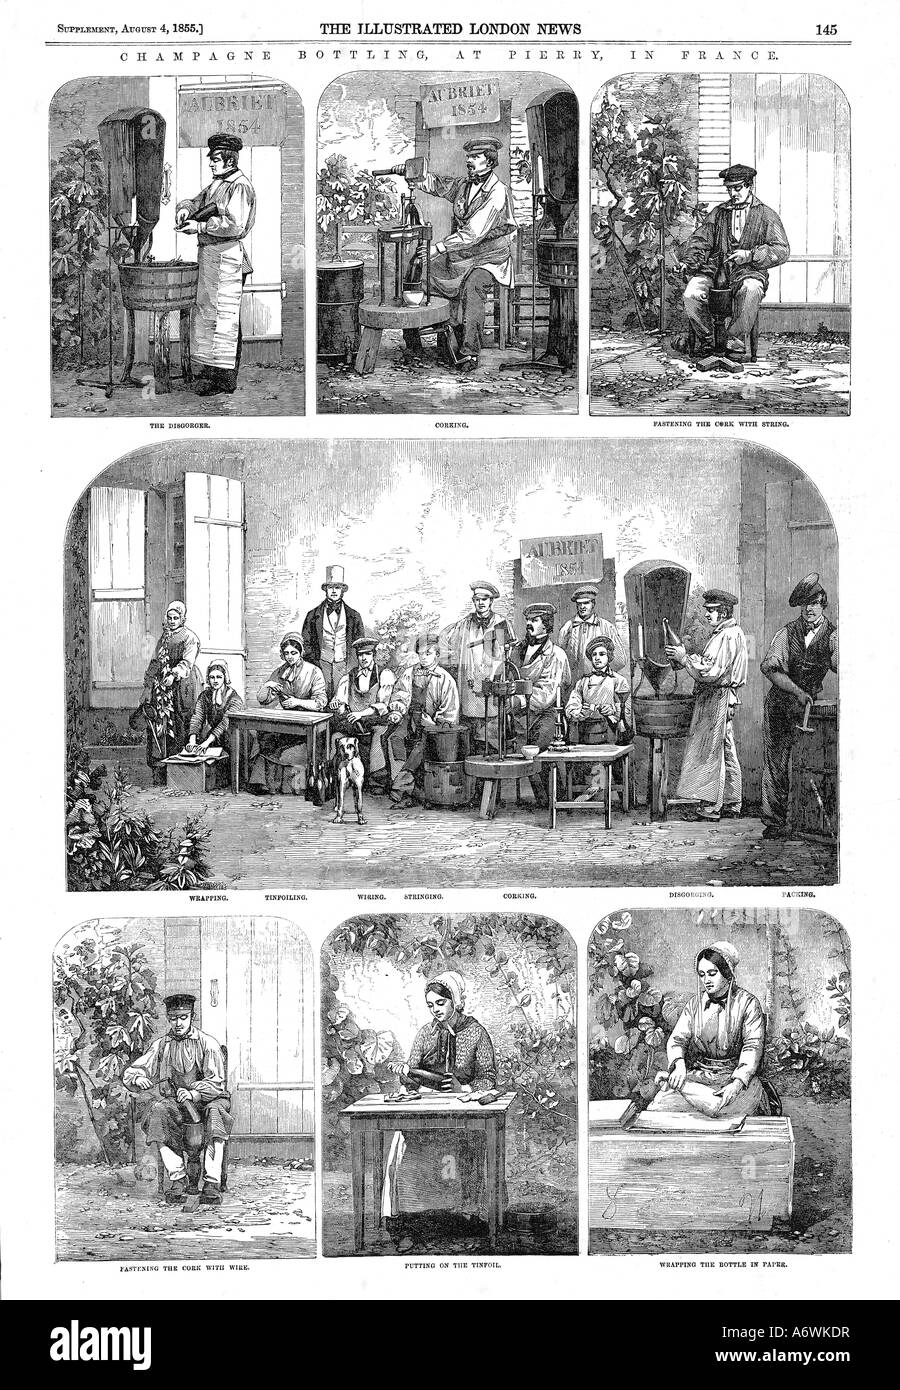 Champagne Bottling 1855 series of engravings showing the process of bottling champagne at Pierry in France Stock Photo